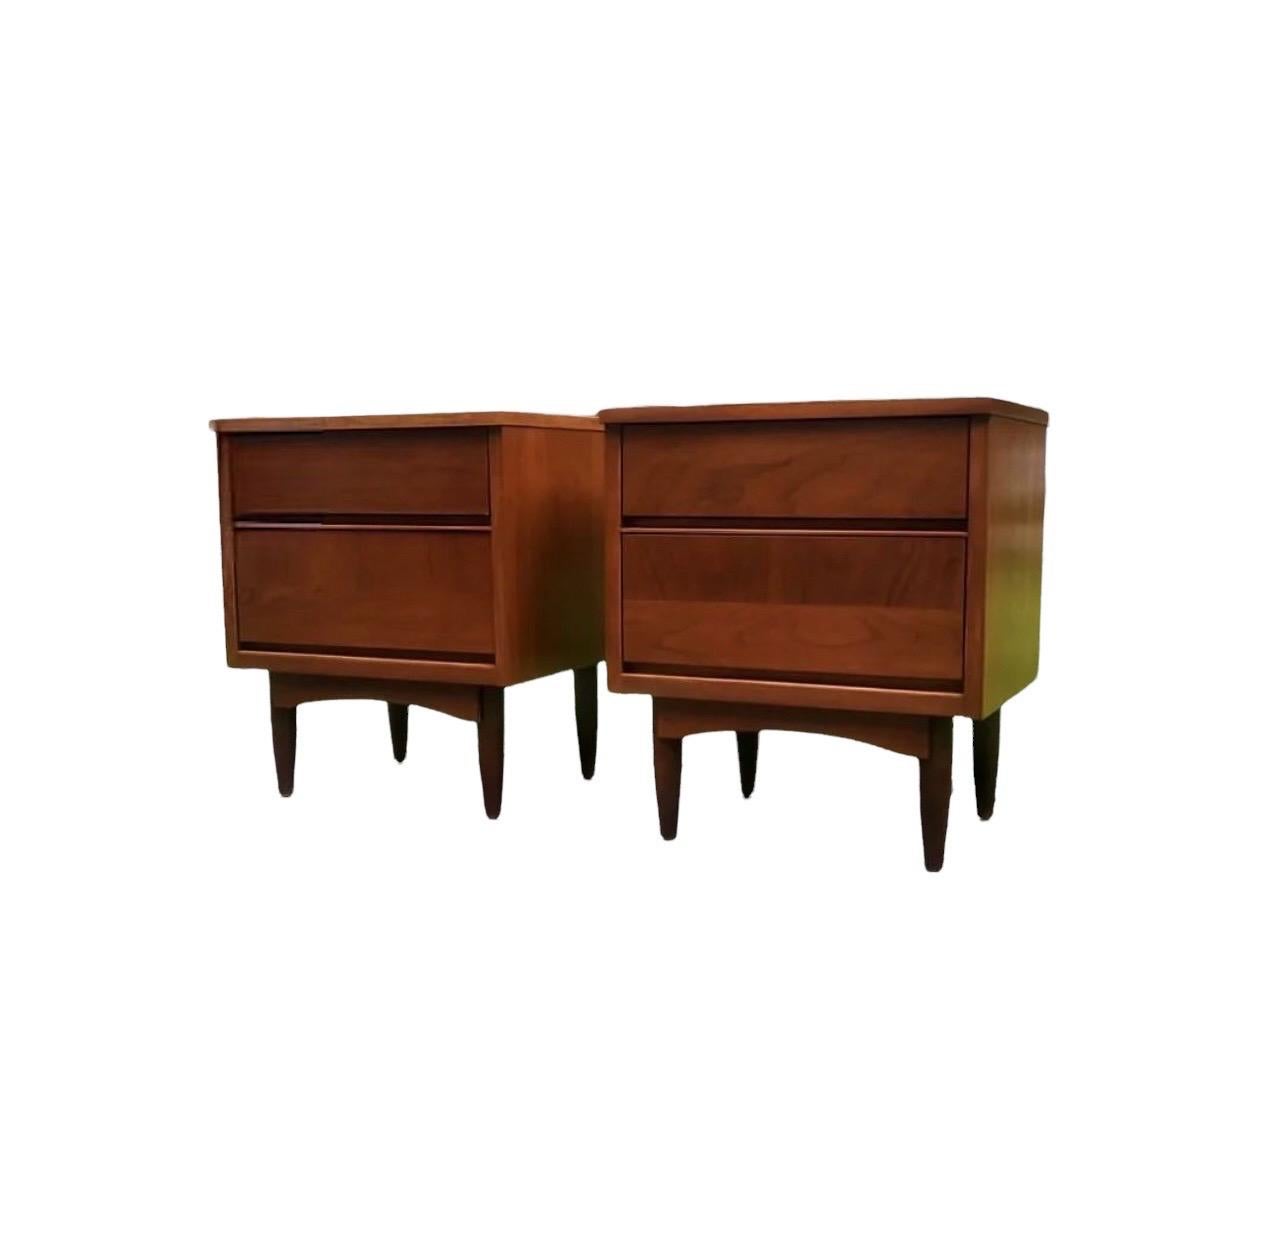 Vintage walnut Mid-Century Modern end table or night stand set 
Dimensions. 20 W; 23 H; 15 D.